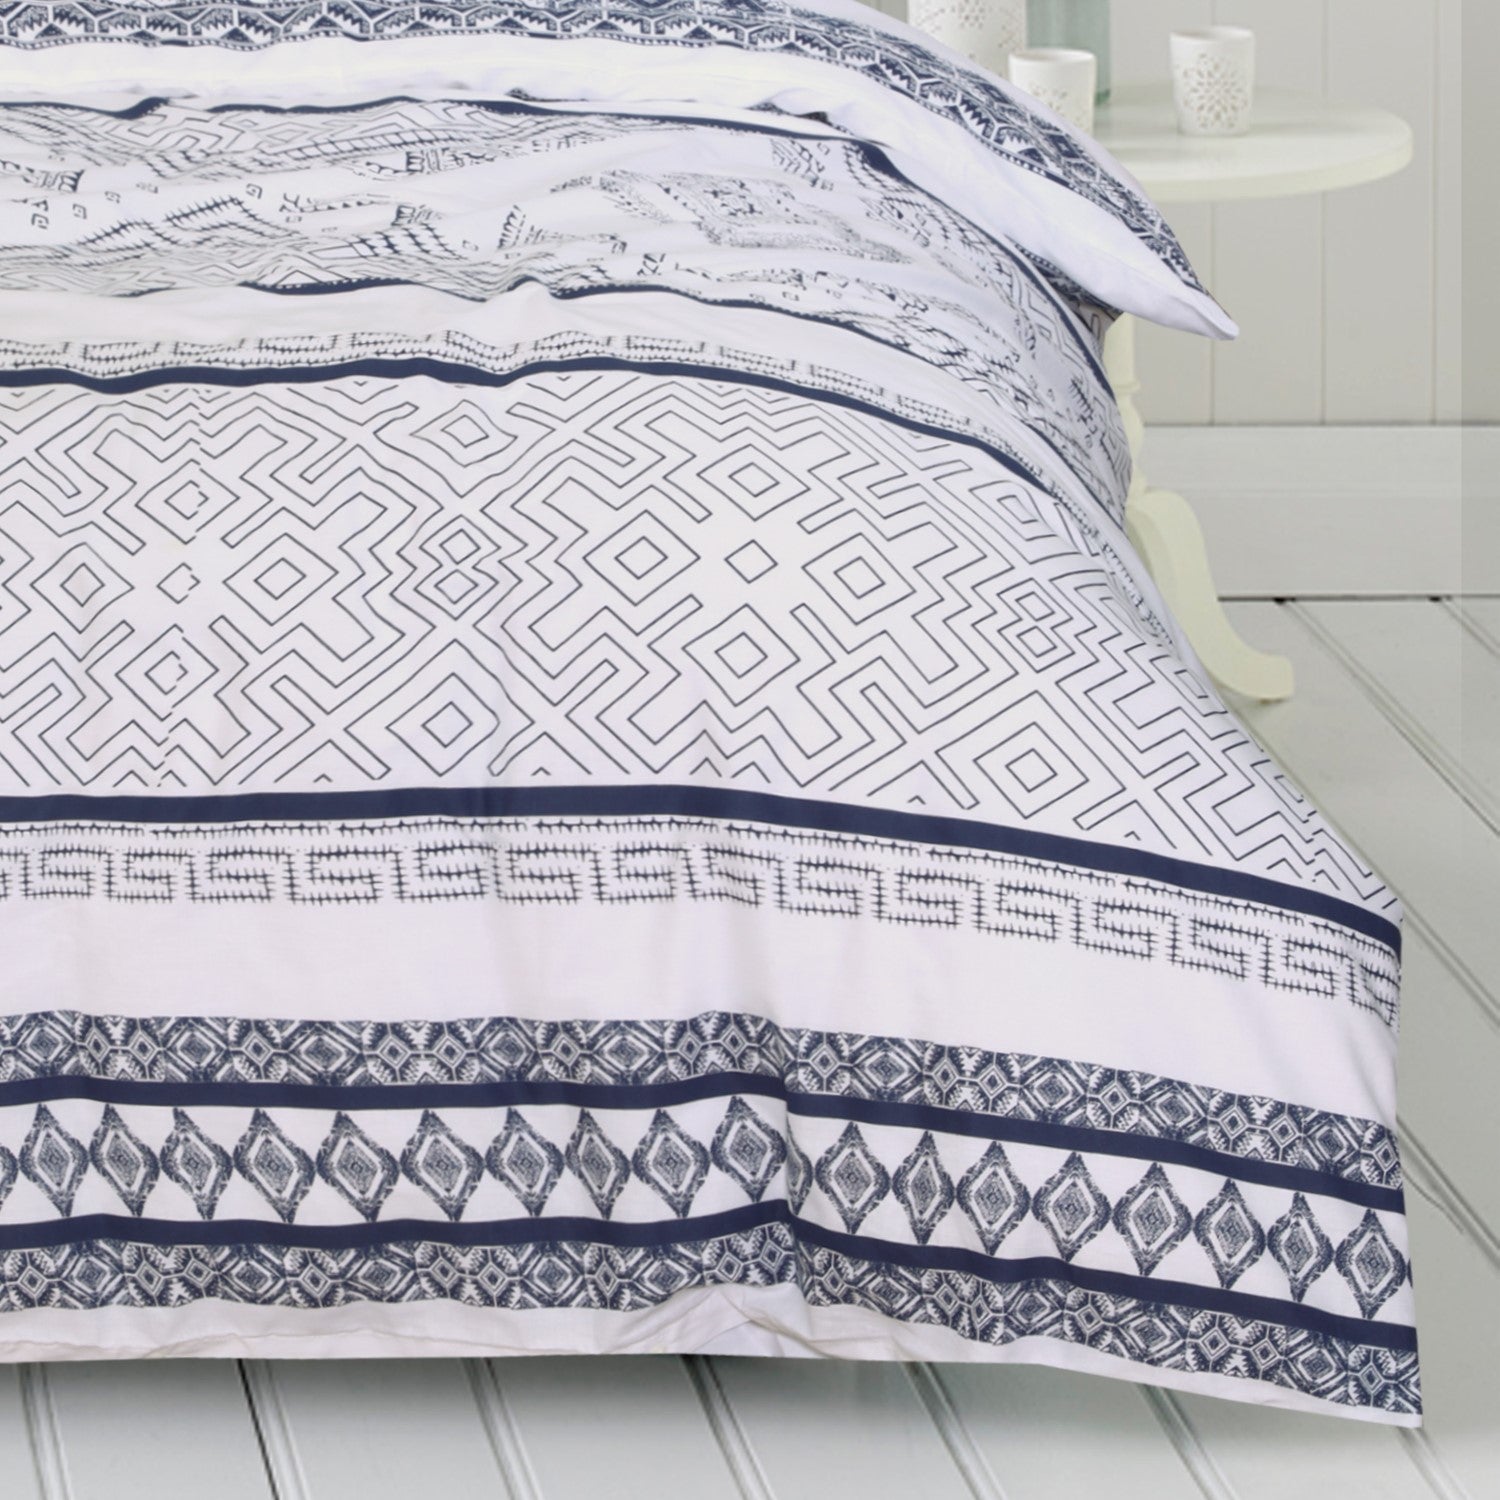 100 % Cotton Duvet Cover Set with Extra Standard Pillow Covers | New Hampton